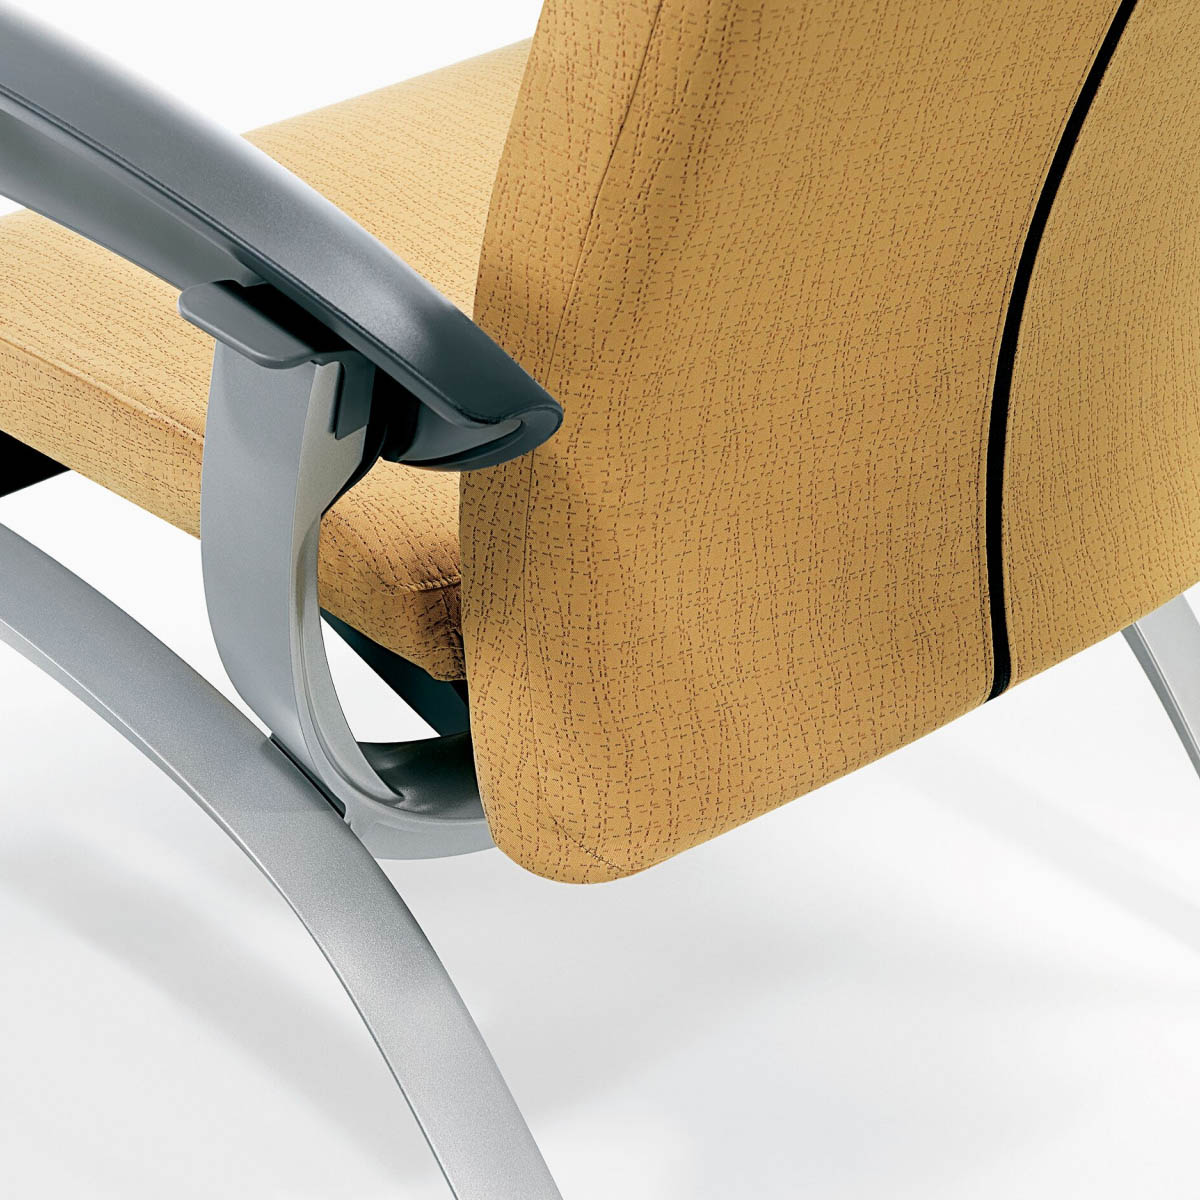 Detail of the back of a Nemschoff Nala Patient Chair showing the back and seat suspension.